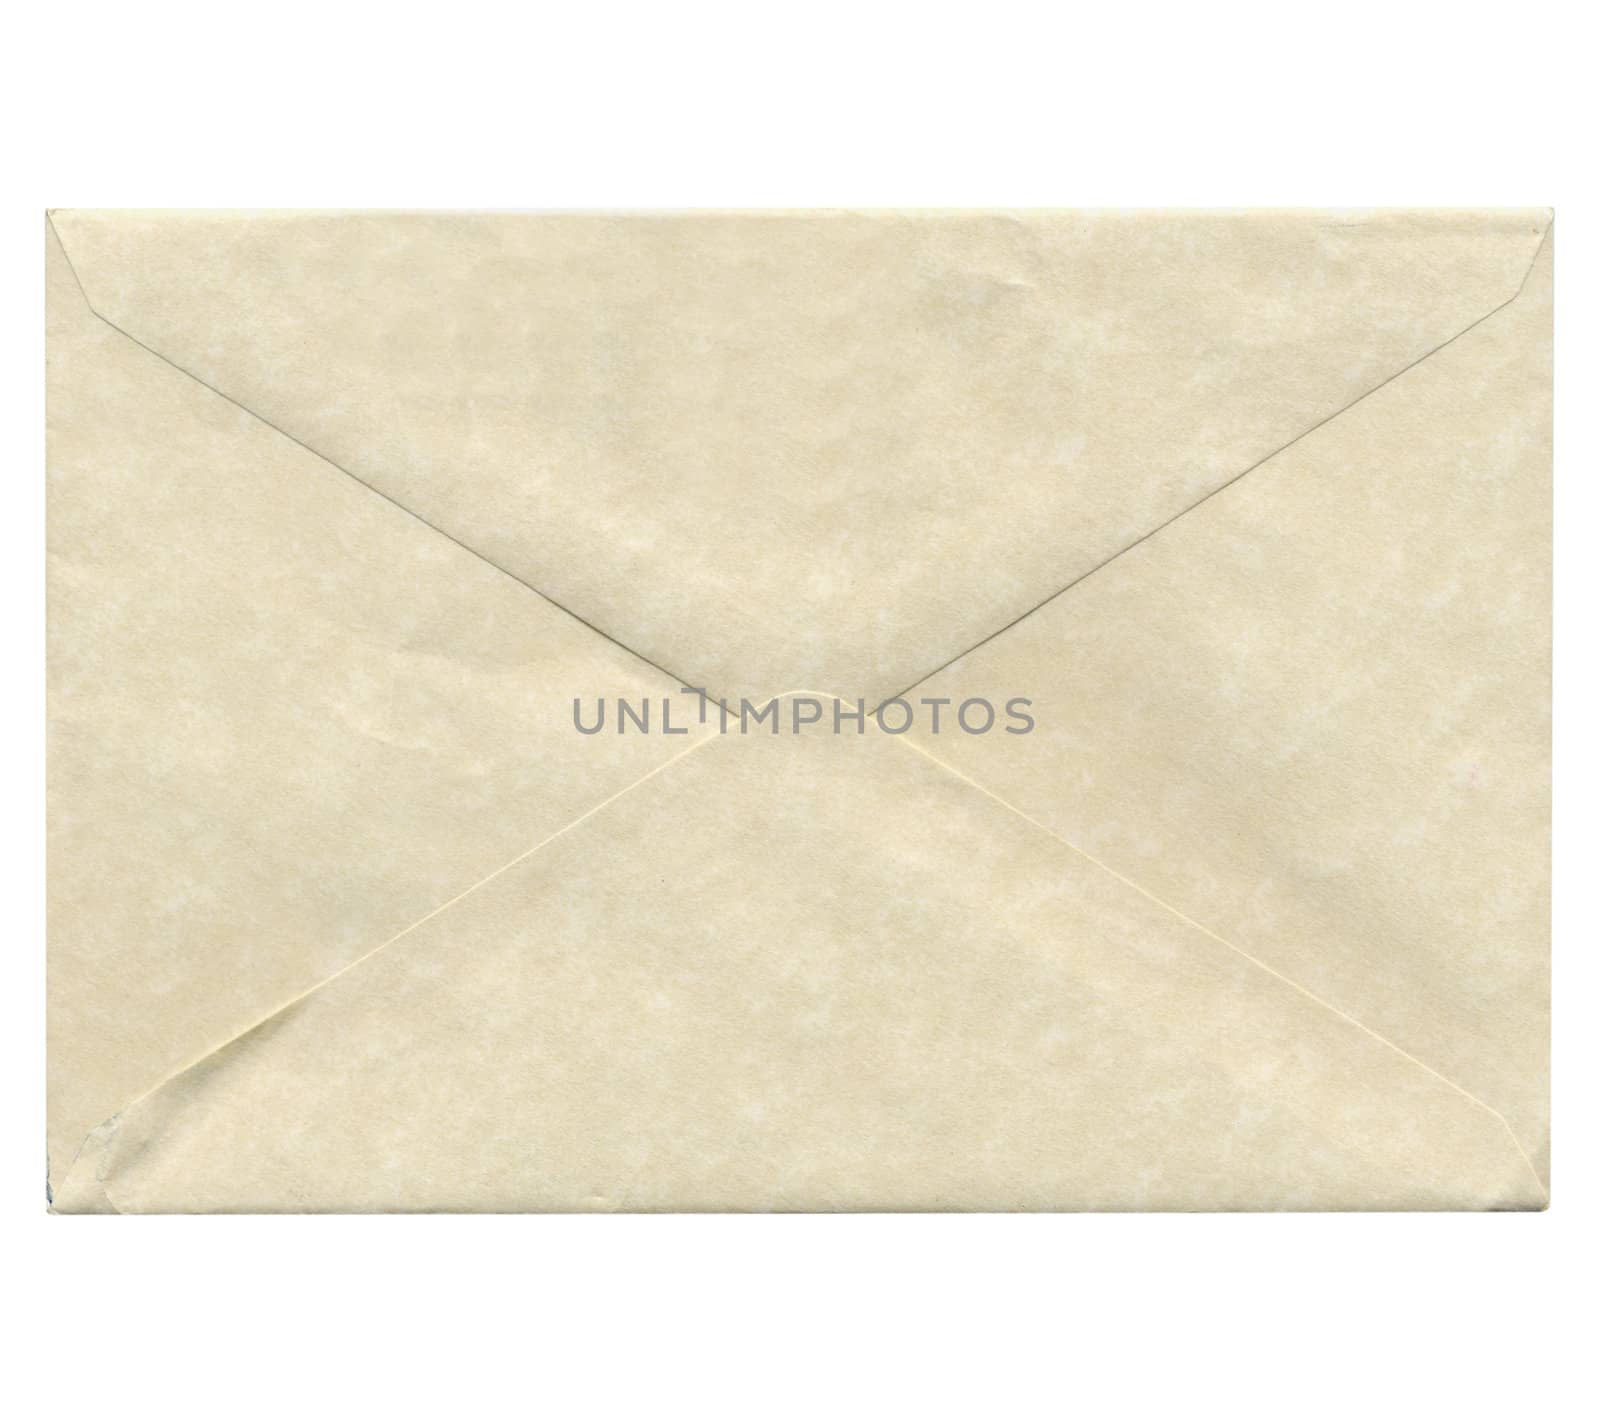 Letter or small packet envelope closed